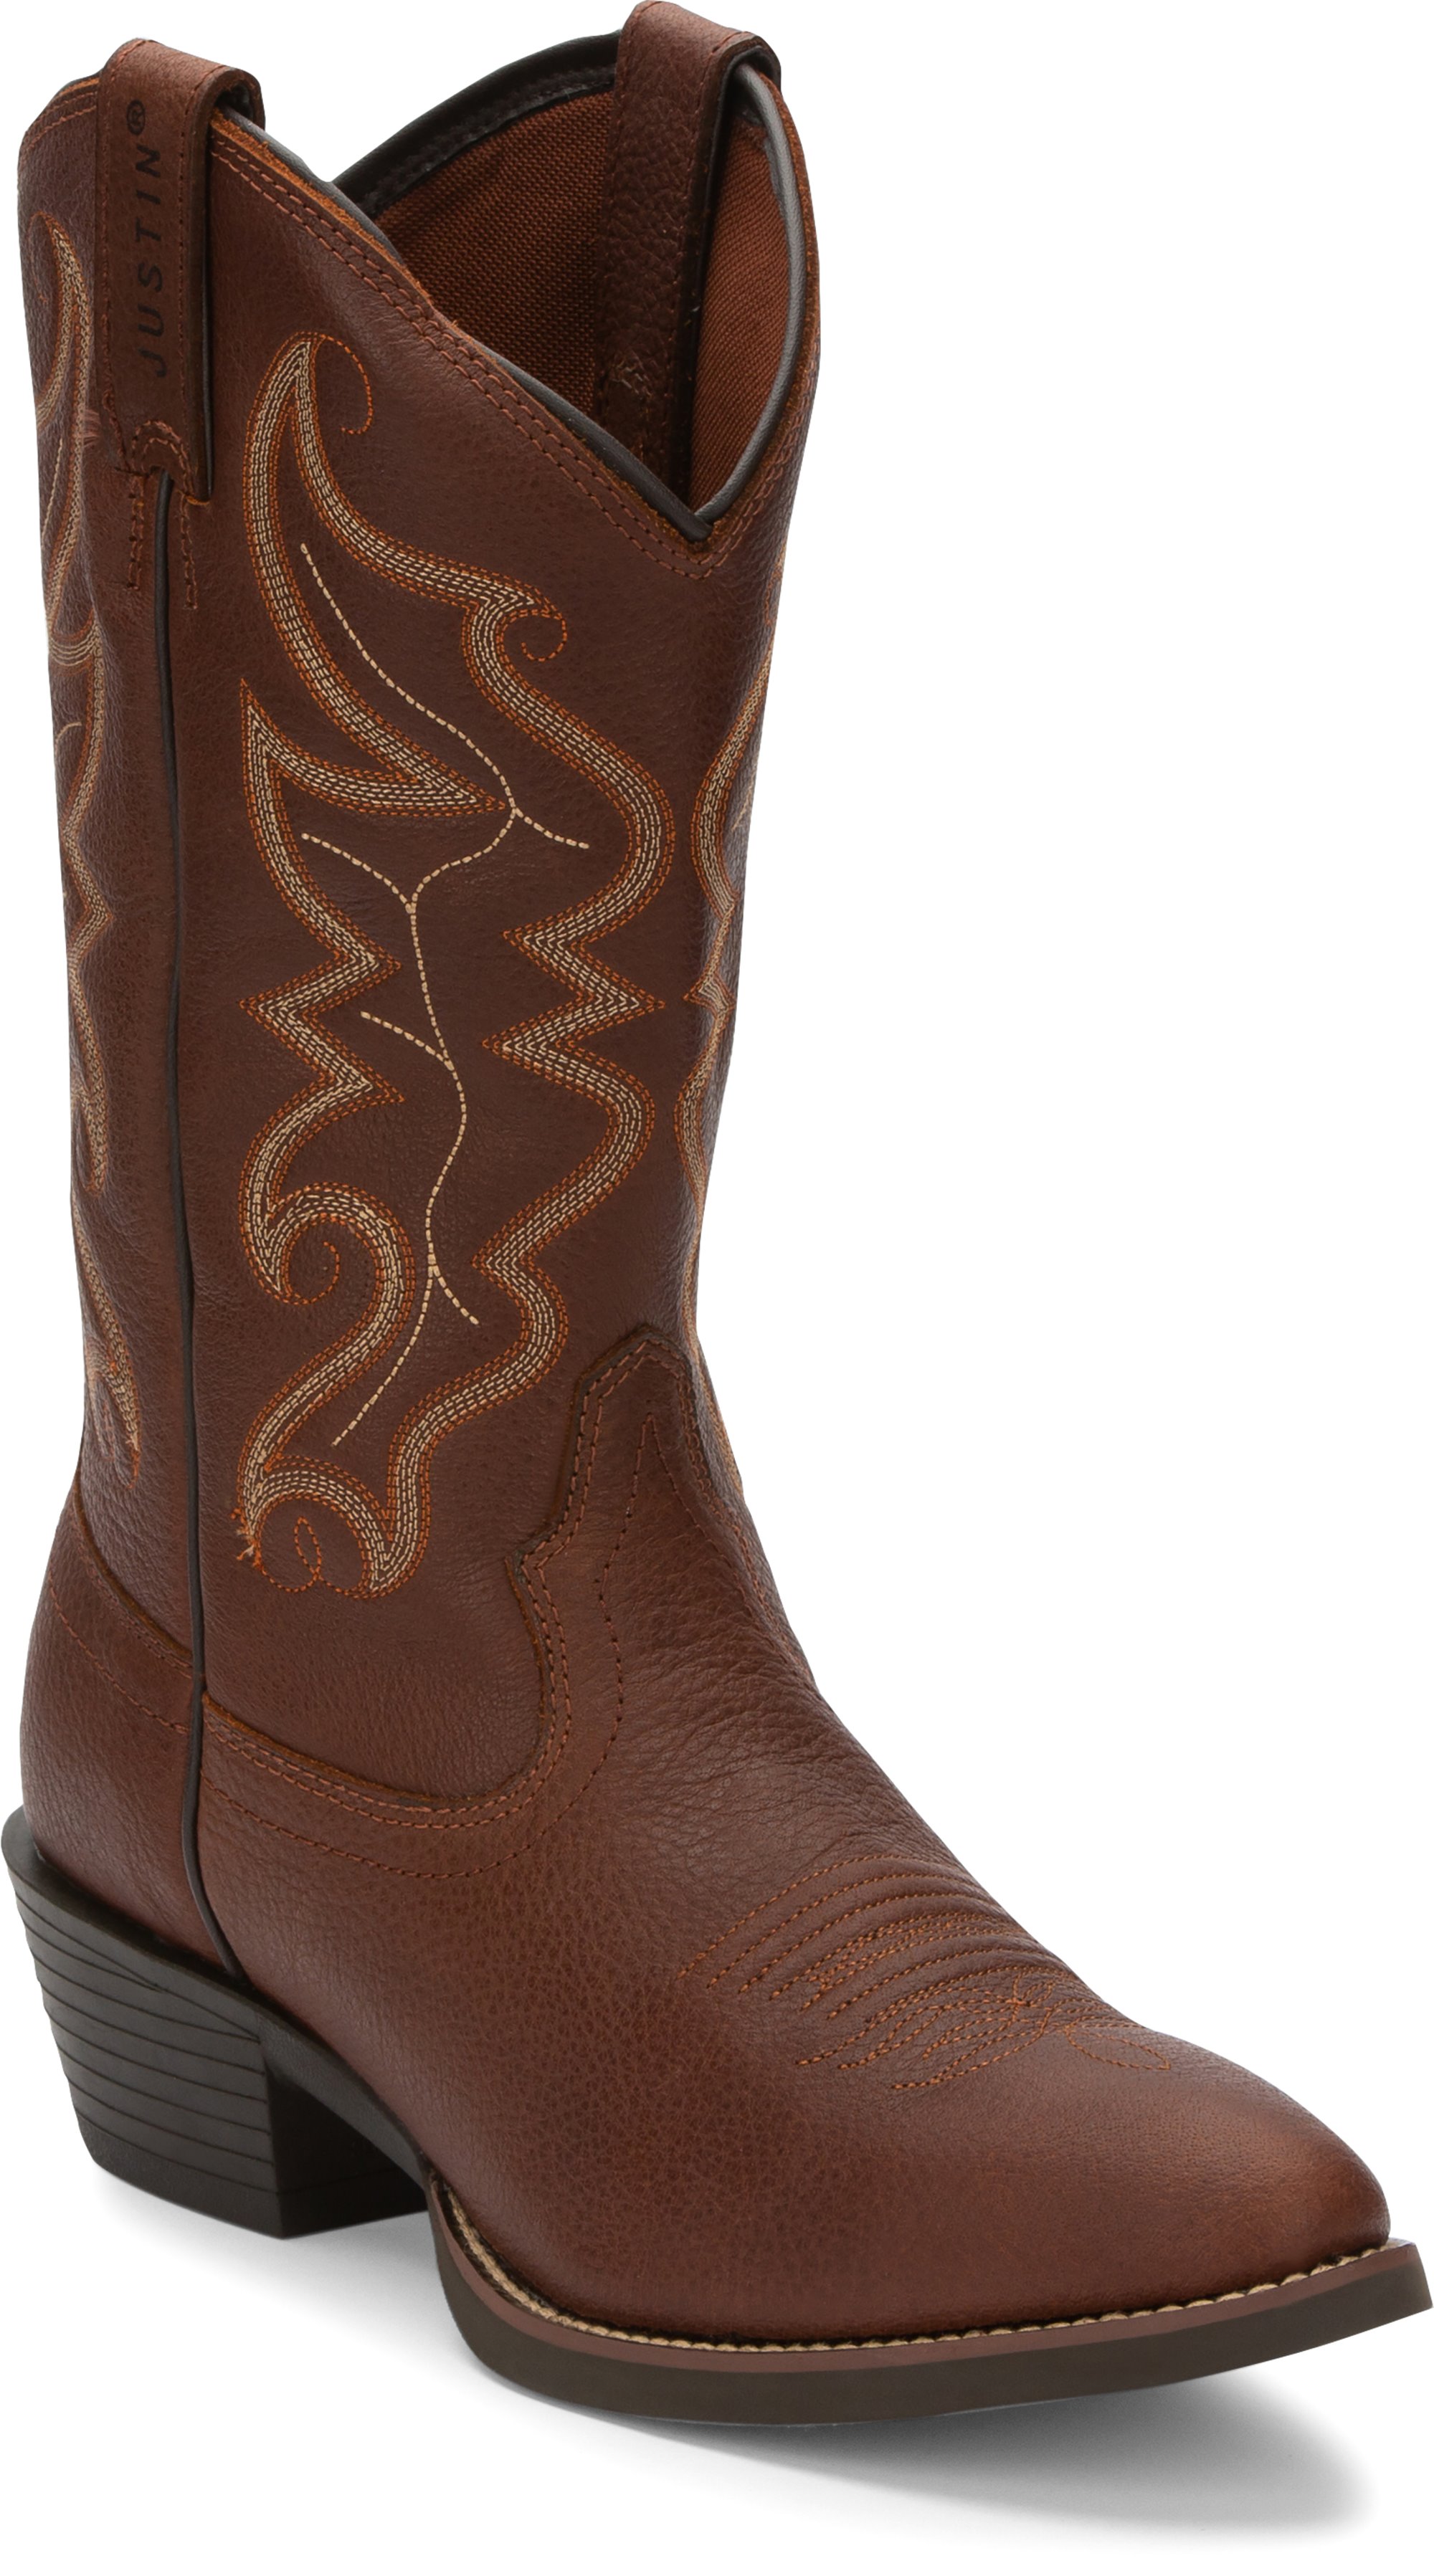 JUSTIN BOOTS #2565 JACE BROWN